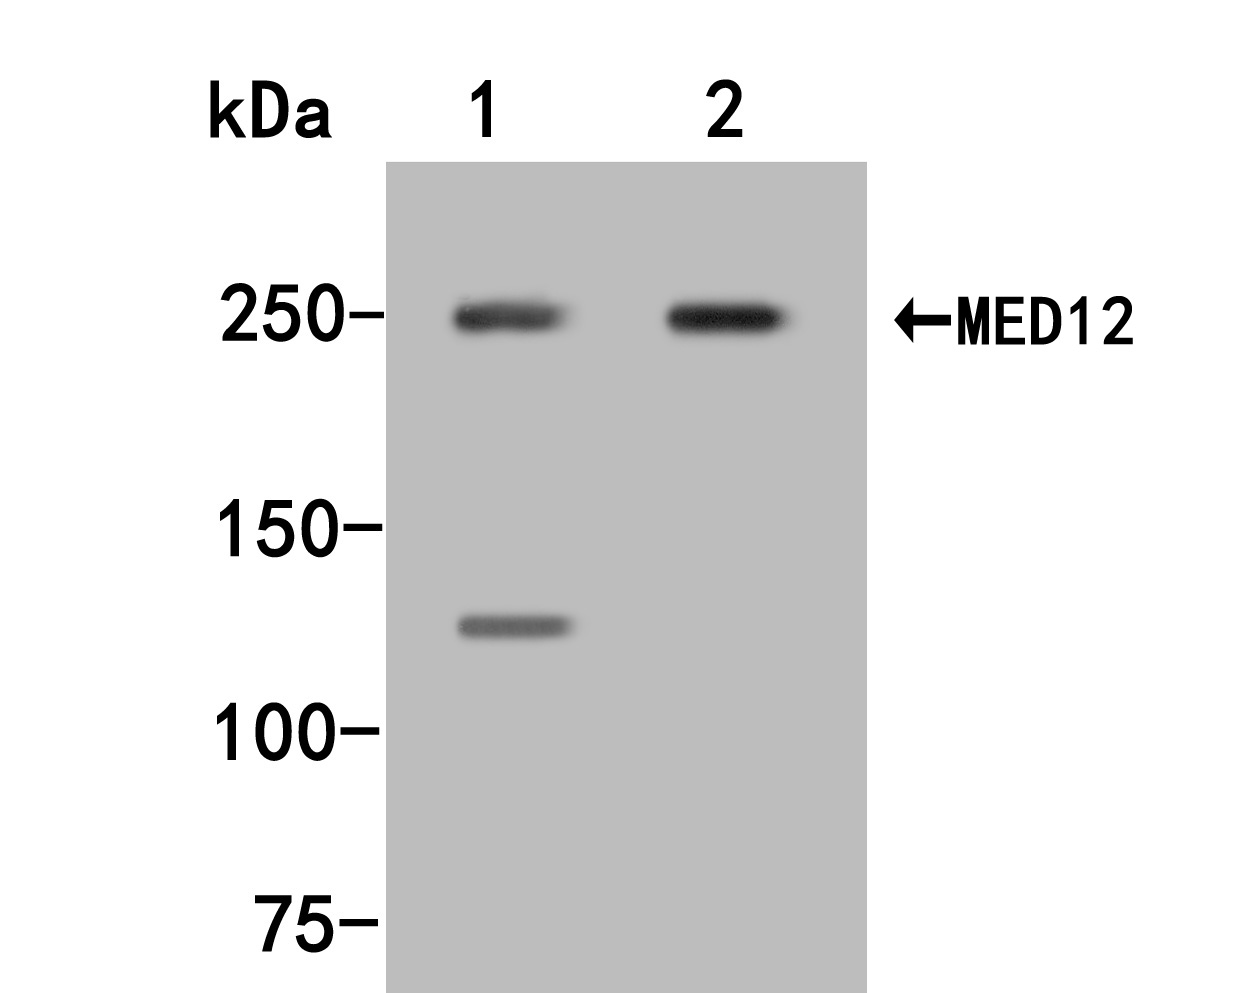 Western blot analysis of MED12 on different lysates. Proteins were transferred to a PVDF membrane and blocked with 5% BSA in PBS for 1 hour at room temperature. The primary antibody (HA500331, 1/500) was used in 5% BSA at room temperature for 2 hours. Goat Anti-Rabbit IgG - HRP Secondary Antibody (HA1001) at 1:200,000 dilution was used for 1 hour at room temperature.<br />
Positive control: <br />
Lane 1: Hela cell lysate<br />
Lane 2: K562 cell lysate<br />
<br />
Western blot analysis of MED12 on different lysates with Rabbit anti-MED12 antibody (HA500331) at 1/500 dilution.<br />
<br />
Lane 1: Hela cell lysate<br />
Lane 2: K562 cell lysate<br />
<br />
Lysates/proteins at 10 µg/Lane.<br />
<br />
Predicted band size: 53 kDa<br />
Observed band size: 53 kDa<br />
<br />
Exposure time: 2 minutes;<br />
<br />
10% SDS-PAGE gel.<br />
<br />
Proteins were transferred to a PVDF membrane and blocked with 5% NFDM/TBST for 1 hour at room temperature. The primary antibody (HA500331) at 1/500 dilution was used in 5% NFDM/TBST at room temperature for 2 hours. Goat Anti-Rabbit IgG - HRP Secondary Antibody (HA1001) at 1:200,000 dilution was used for 1 hour at room temperature.